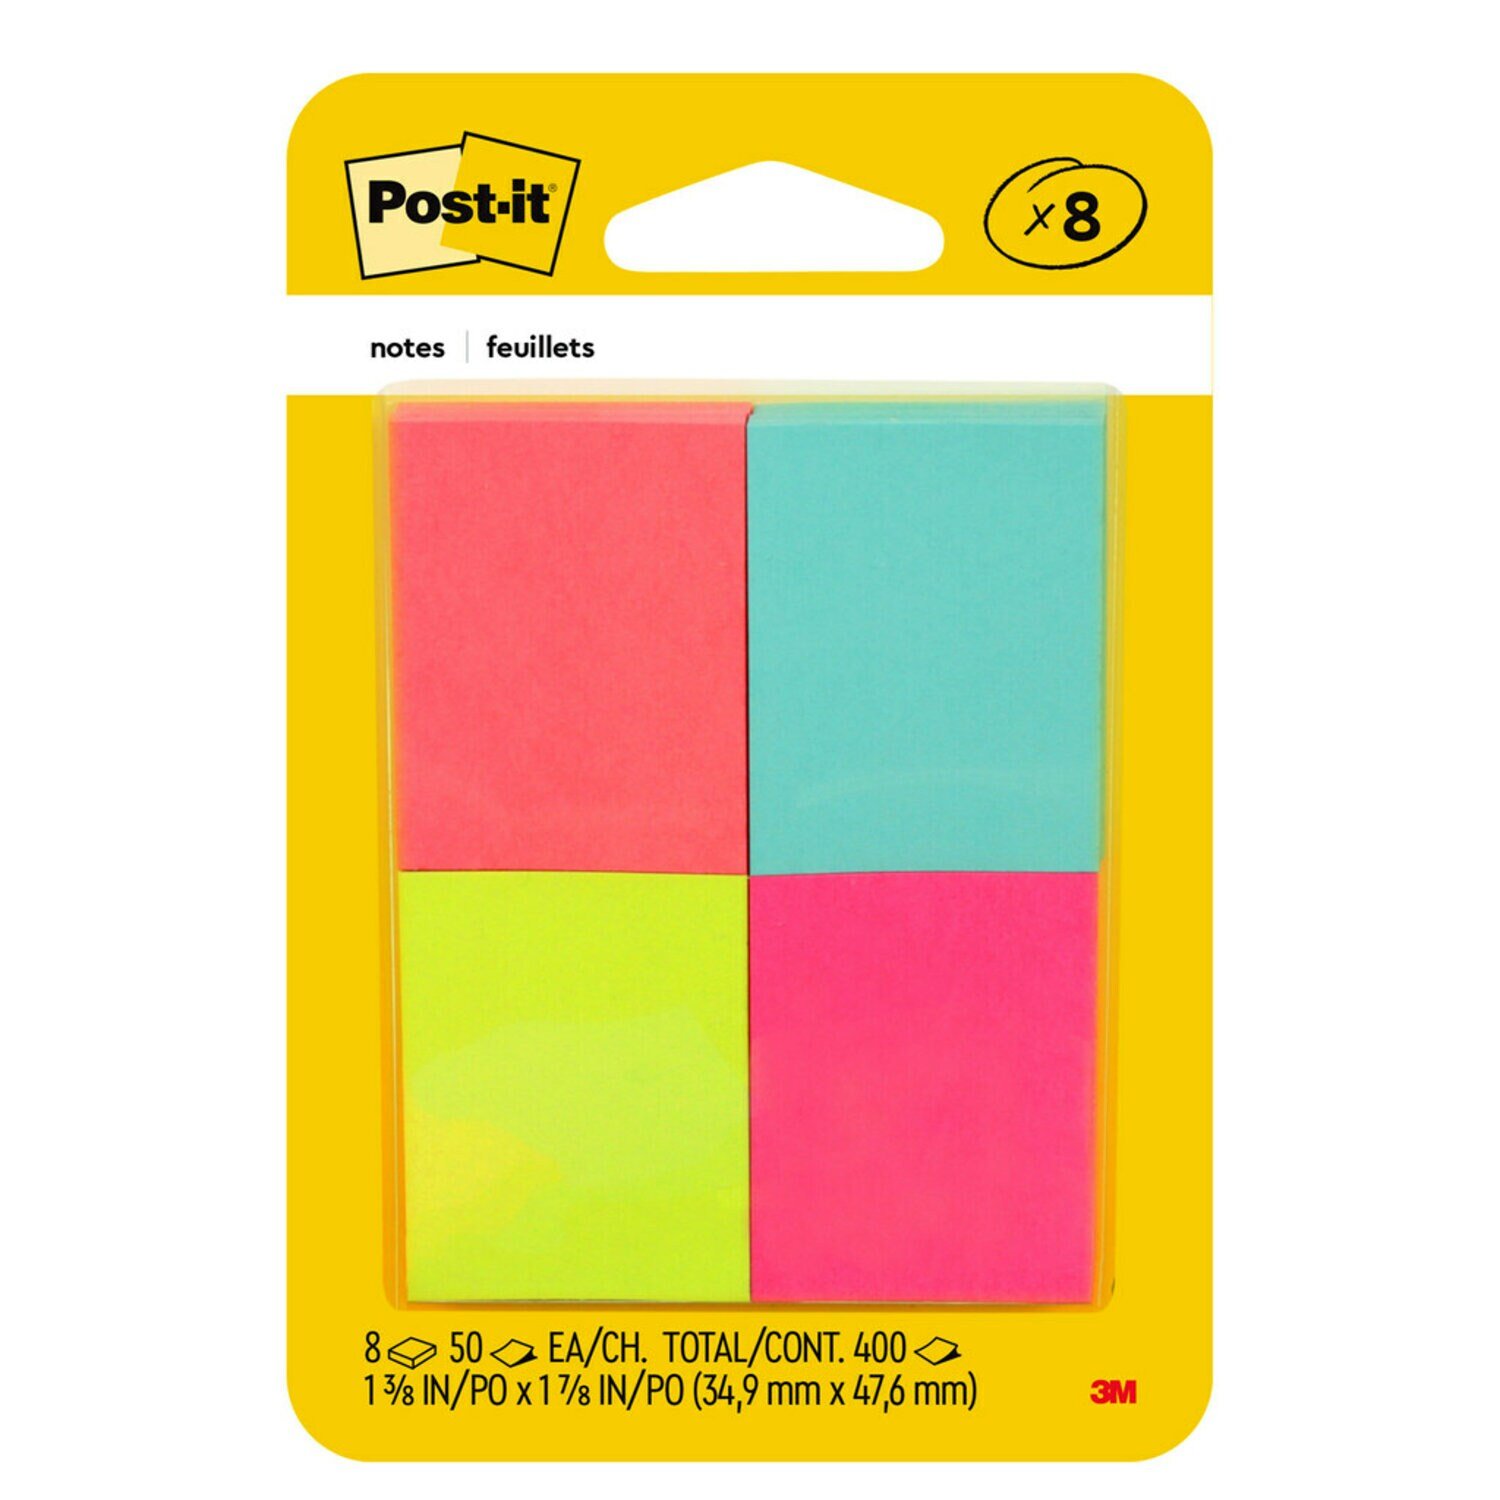 7100243120 - Post-it Notes 653-8AF, 1-3/8 in x 1-7/8 in (34,9 mm x 47,6 mm) Capetown colors